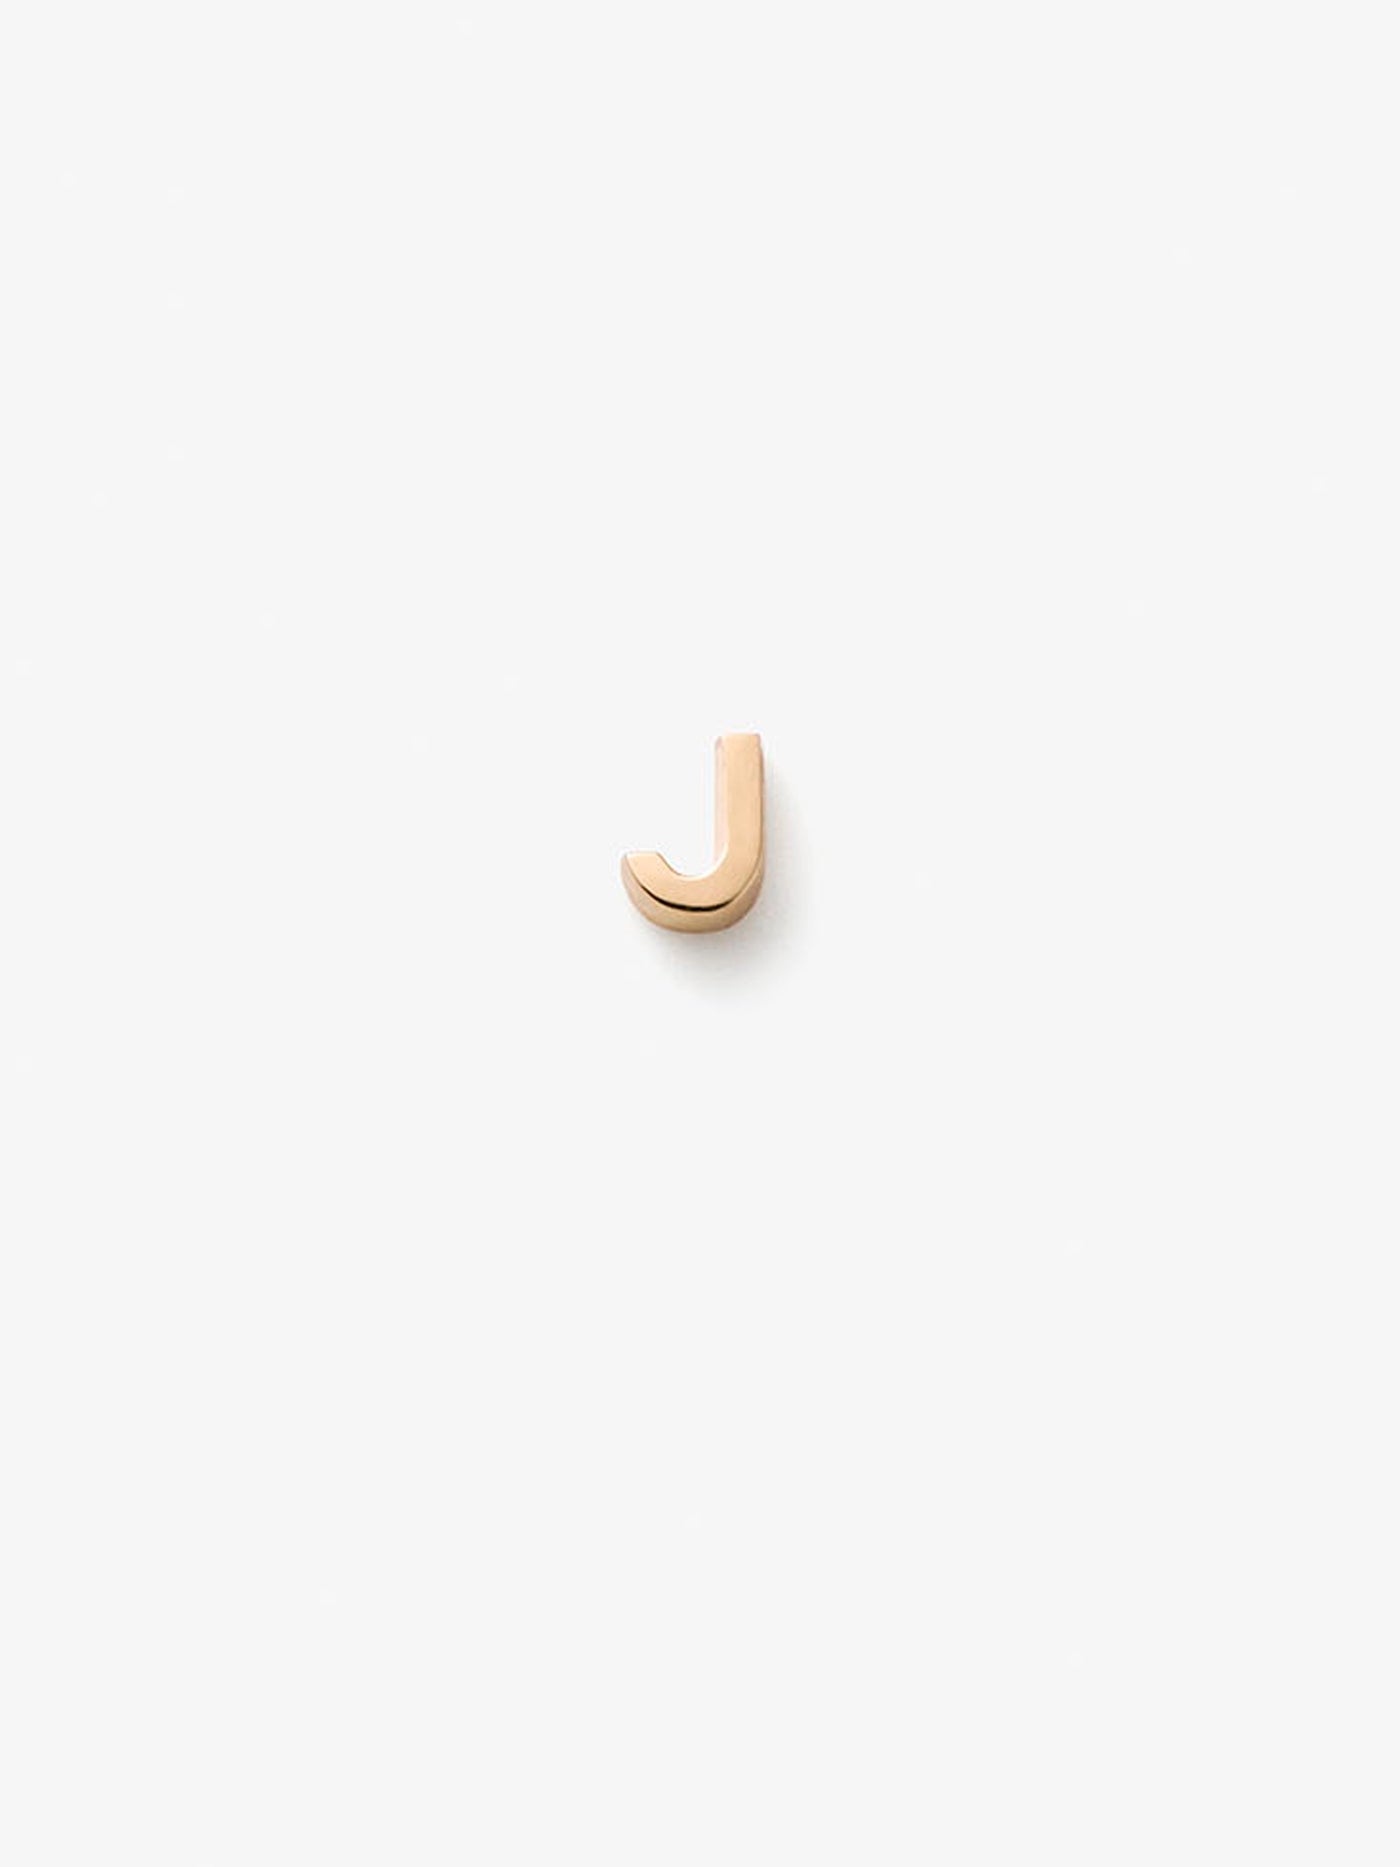 One Letter J in 18k Gold